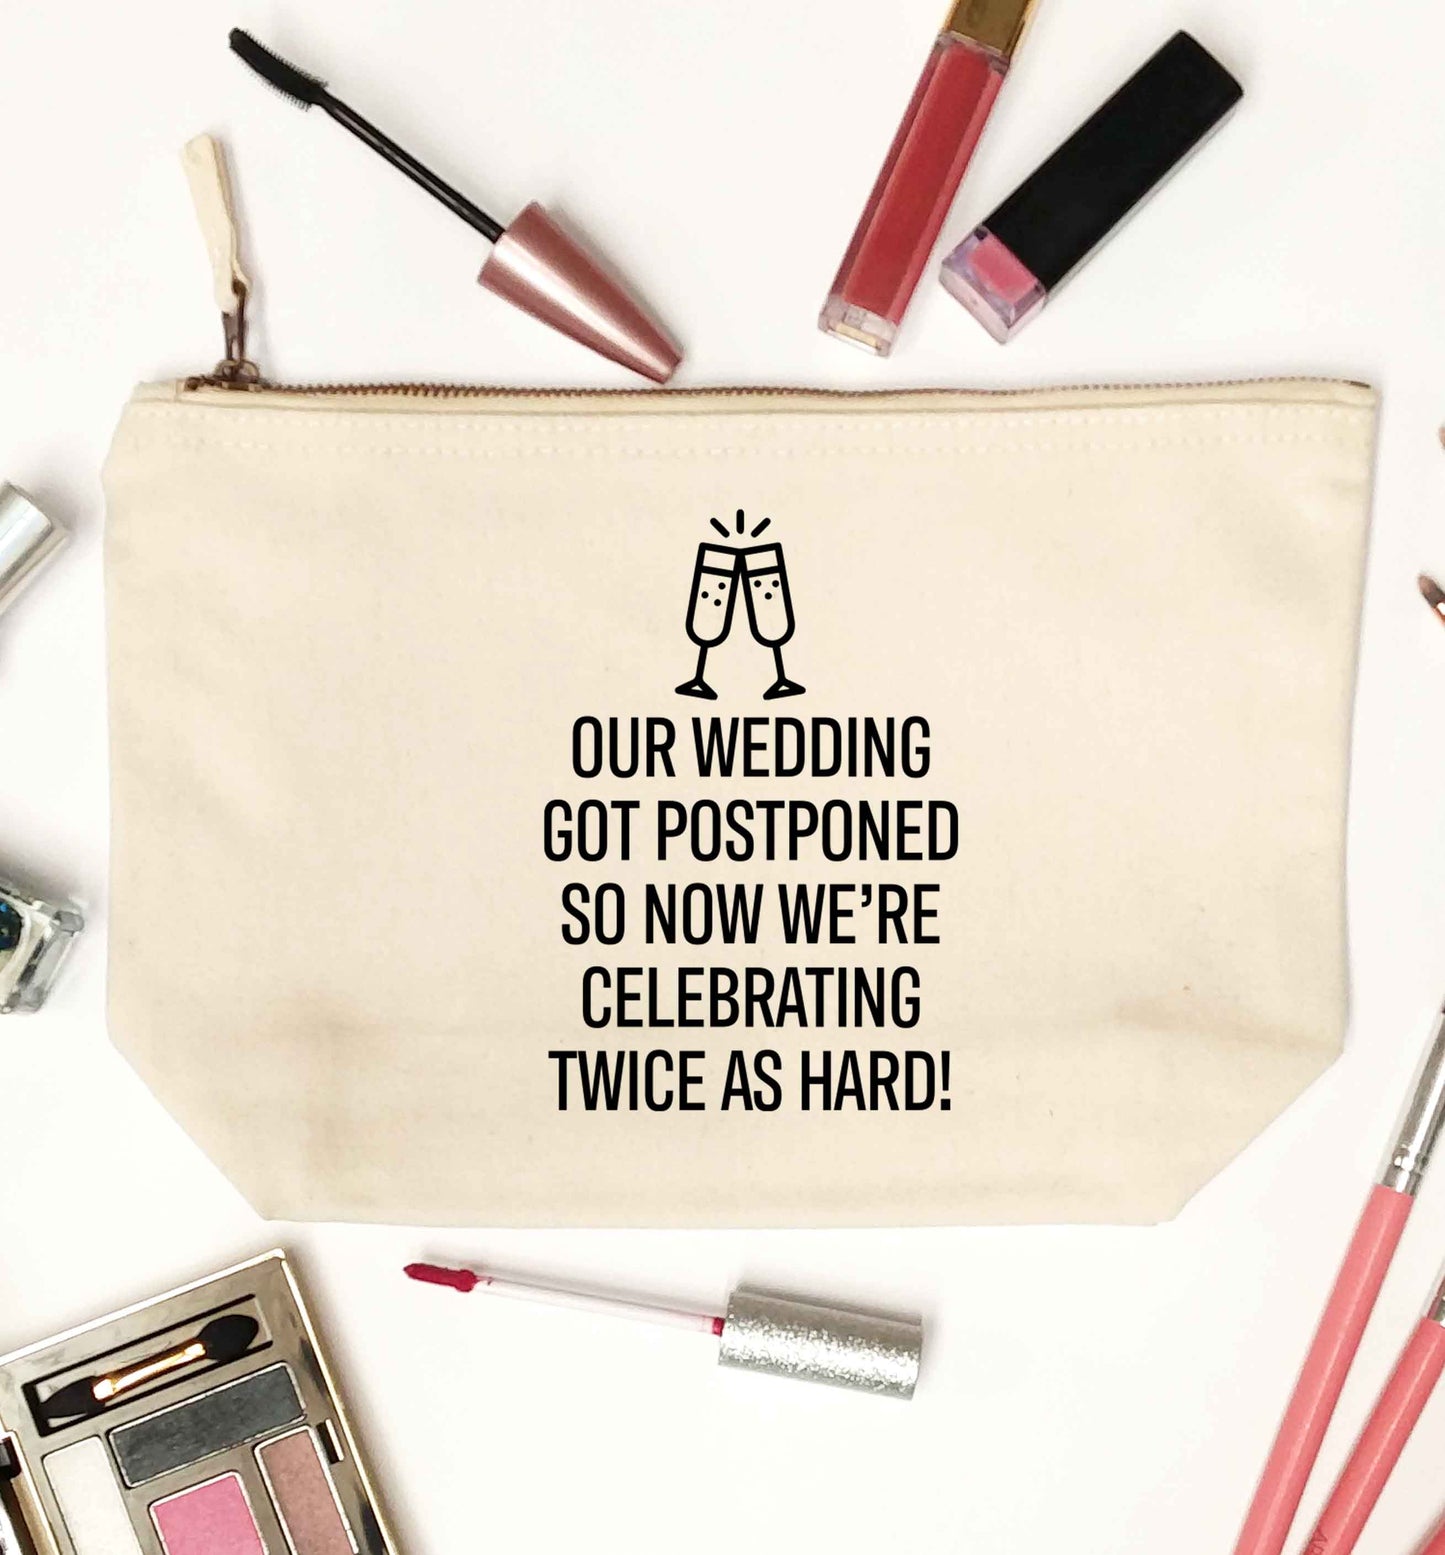 Postponed wedding? Sounds like an excuse to party twice as hard!  natural makeup bag